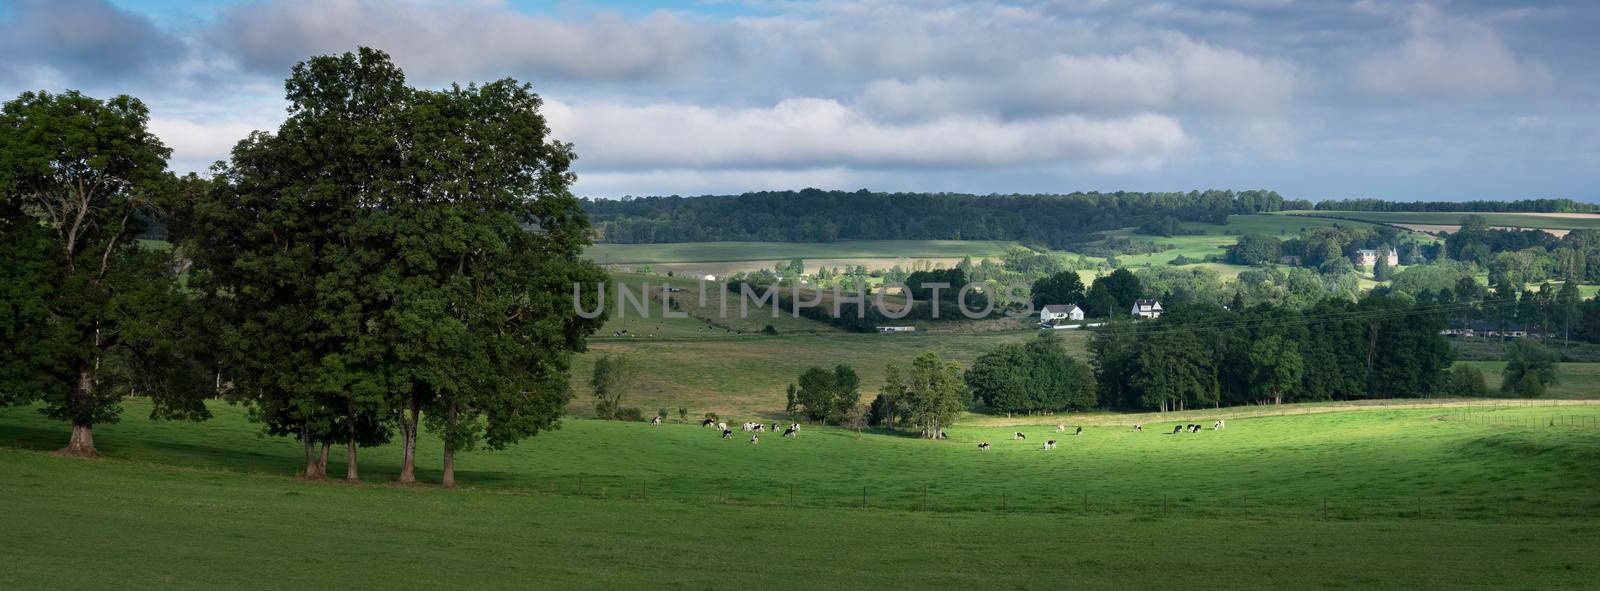 green grassy meadows with black and white cows and trees in french ardennes near charleville in north of france